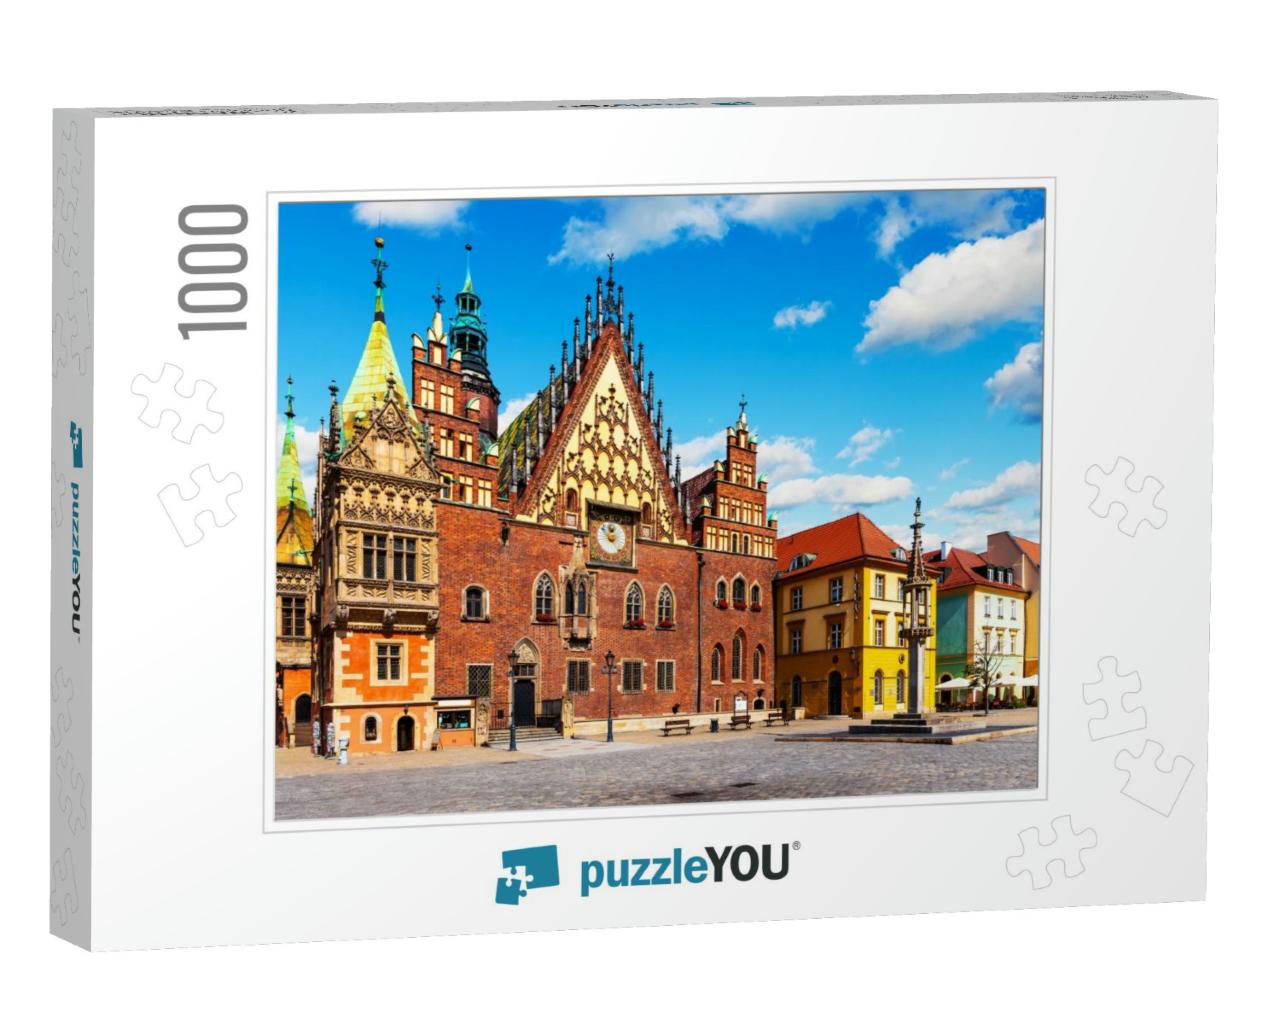 Scenic Summer View of the Ancient City Hall Building At t... Jigsaw Puzzle with 1000 pieces